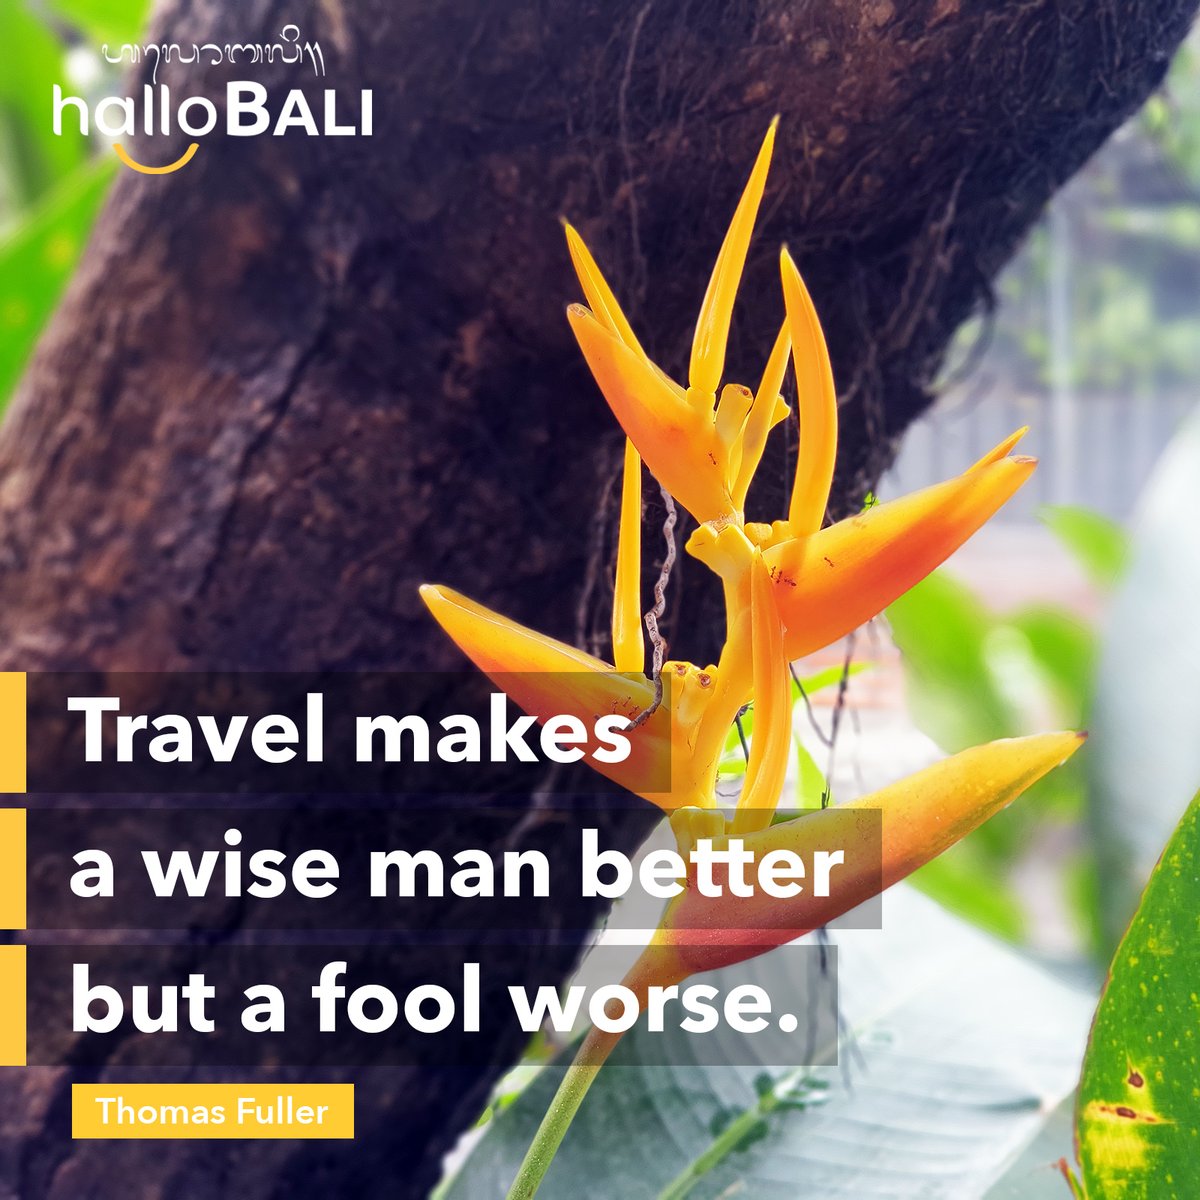 Travel makes a wise man better, but a fool worse. Ready for wisdom? Bali awaits! Explore the best tropical paradise with HalloBALI, your key to an unforgettable journey.
#Bali #Travel #Tour #BaliTravel #BaliTour #BaliTourPackage #TravelQuote #QuoteOfTheDay #HalloBALI